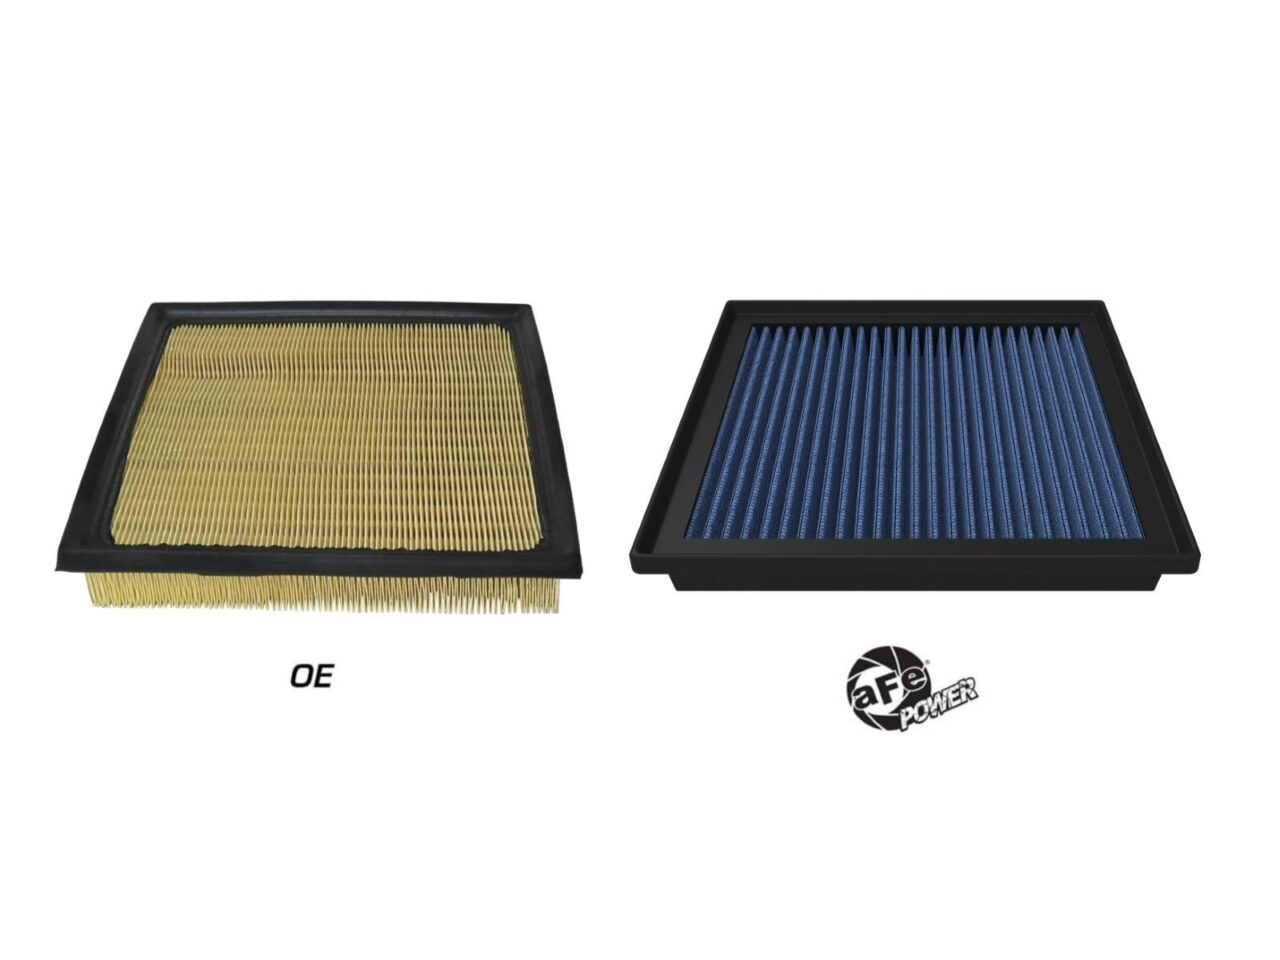 Yellow paper stock filter versus blue oiled aftermarket air filter on white background